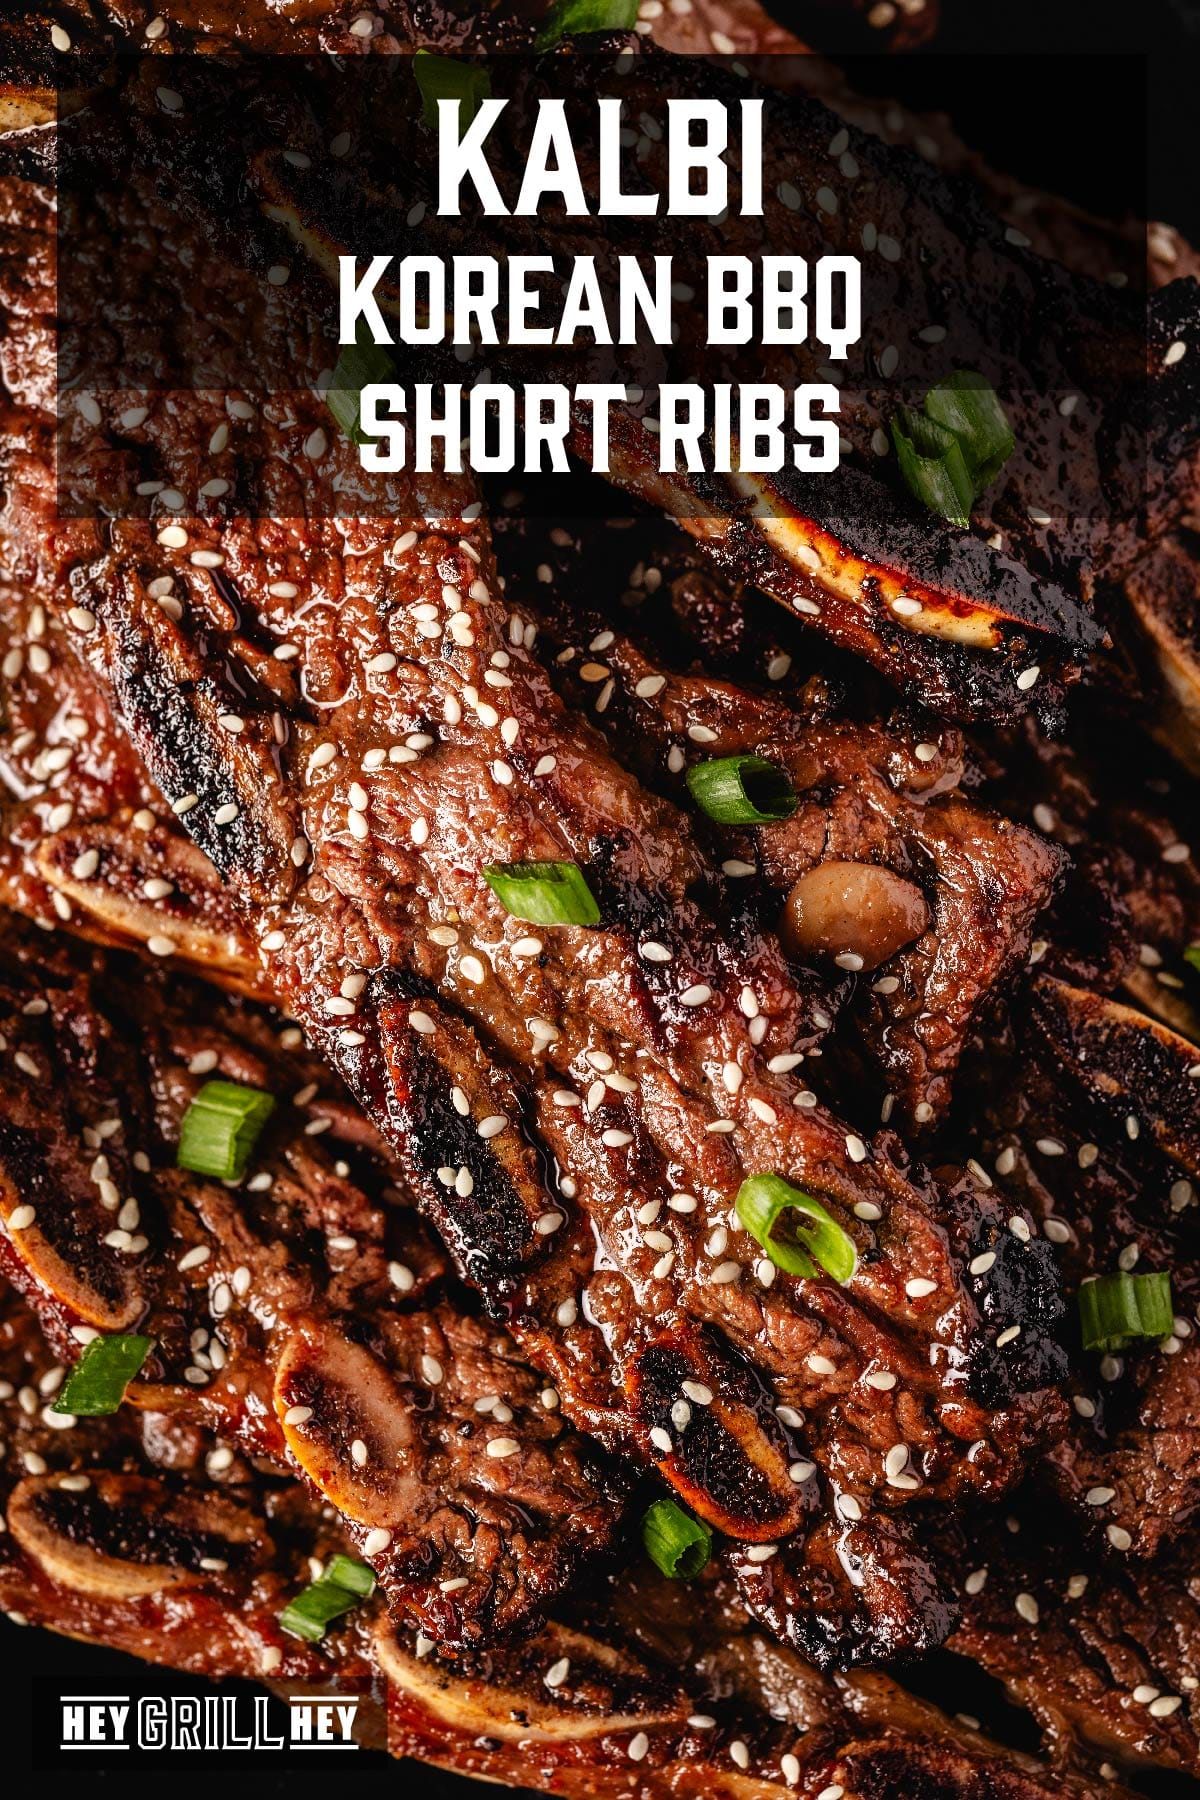 BBQ short ribs with sesame seeds and green onions. Text reads "Kalbi Korean BBQ Short Ribs".